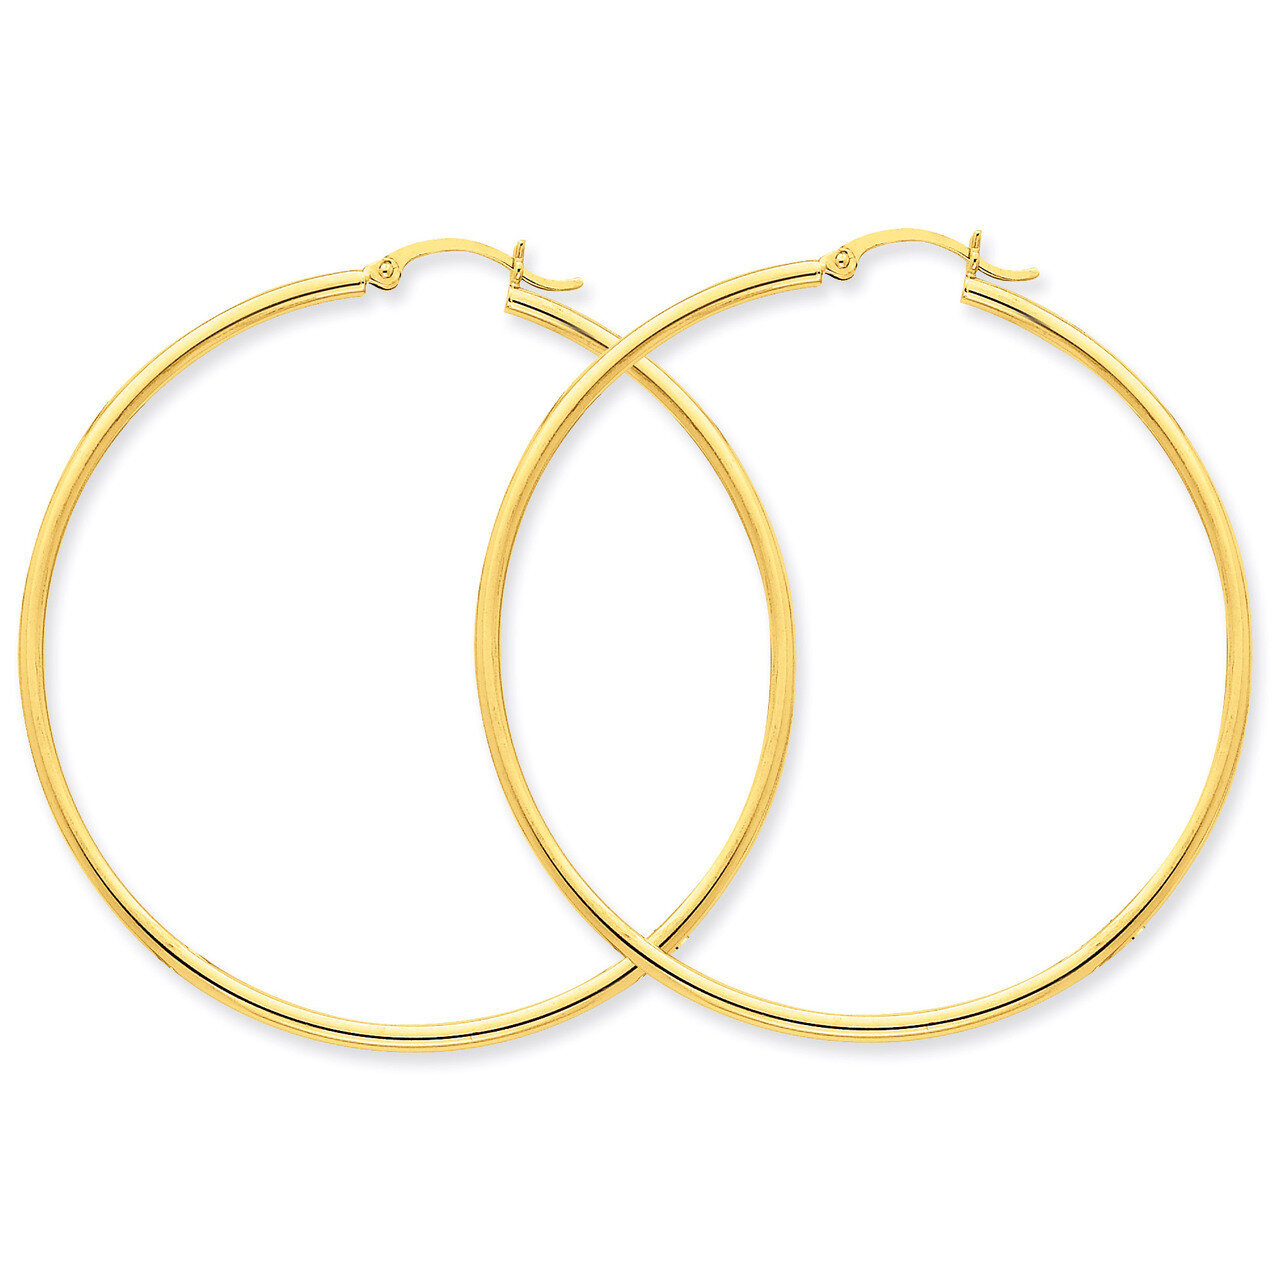 Polished 2mm Round Hoop Earrings 10k Gold 10T922